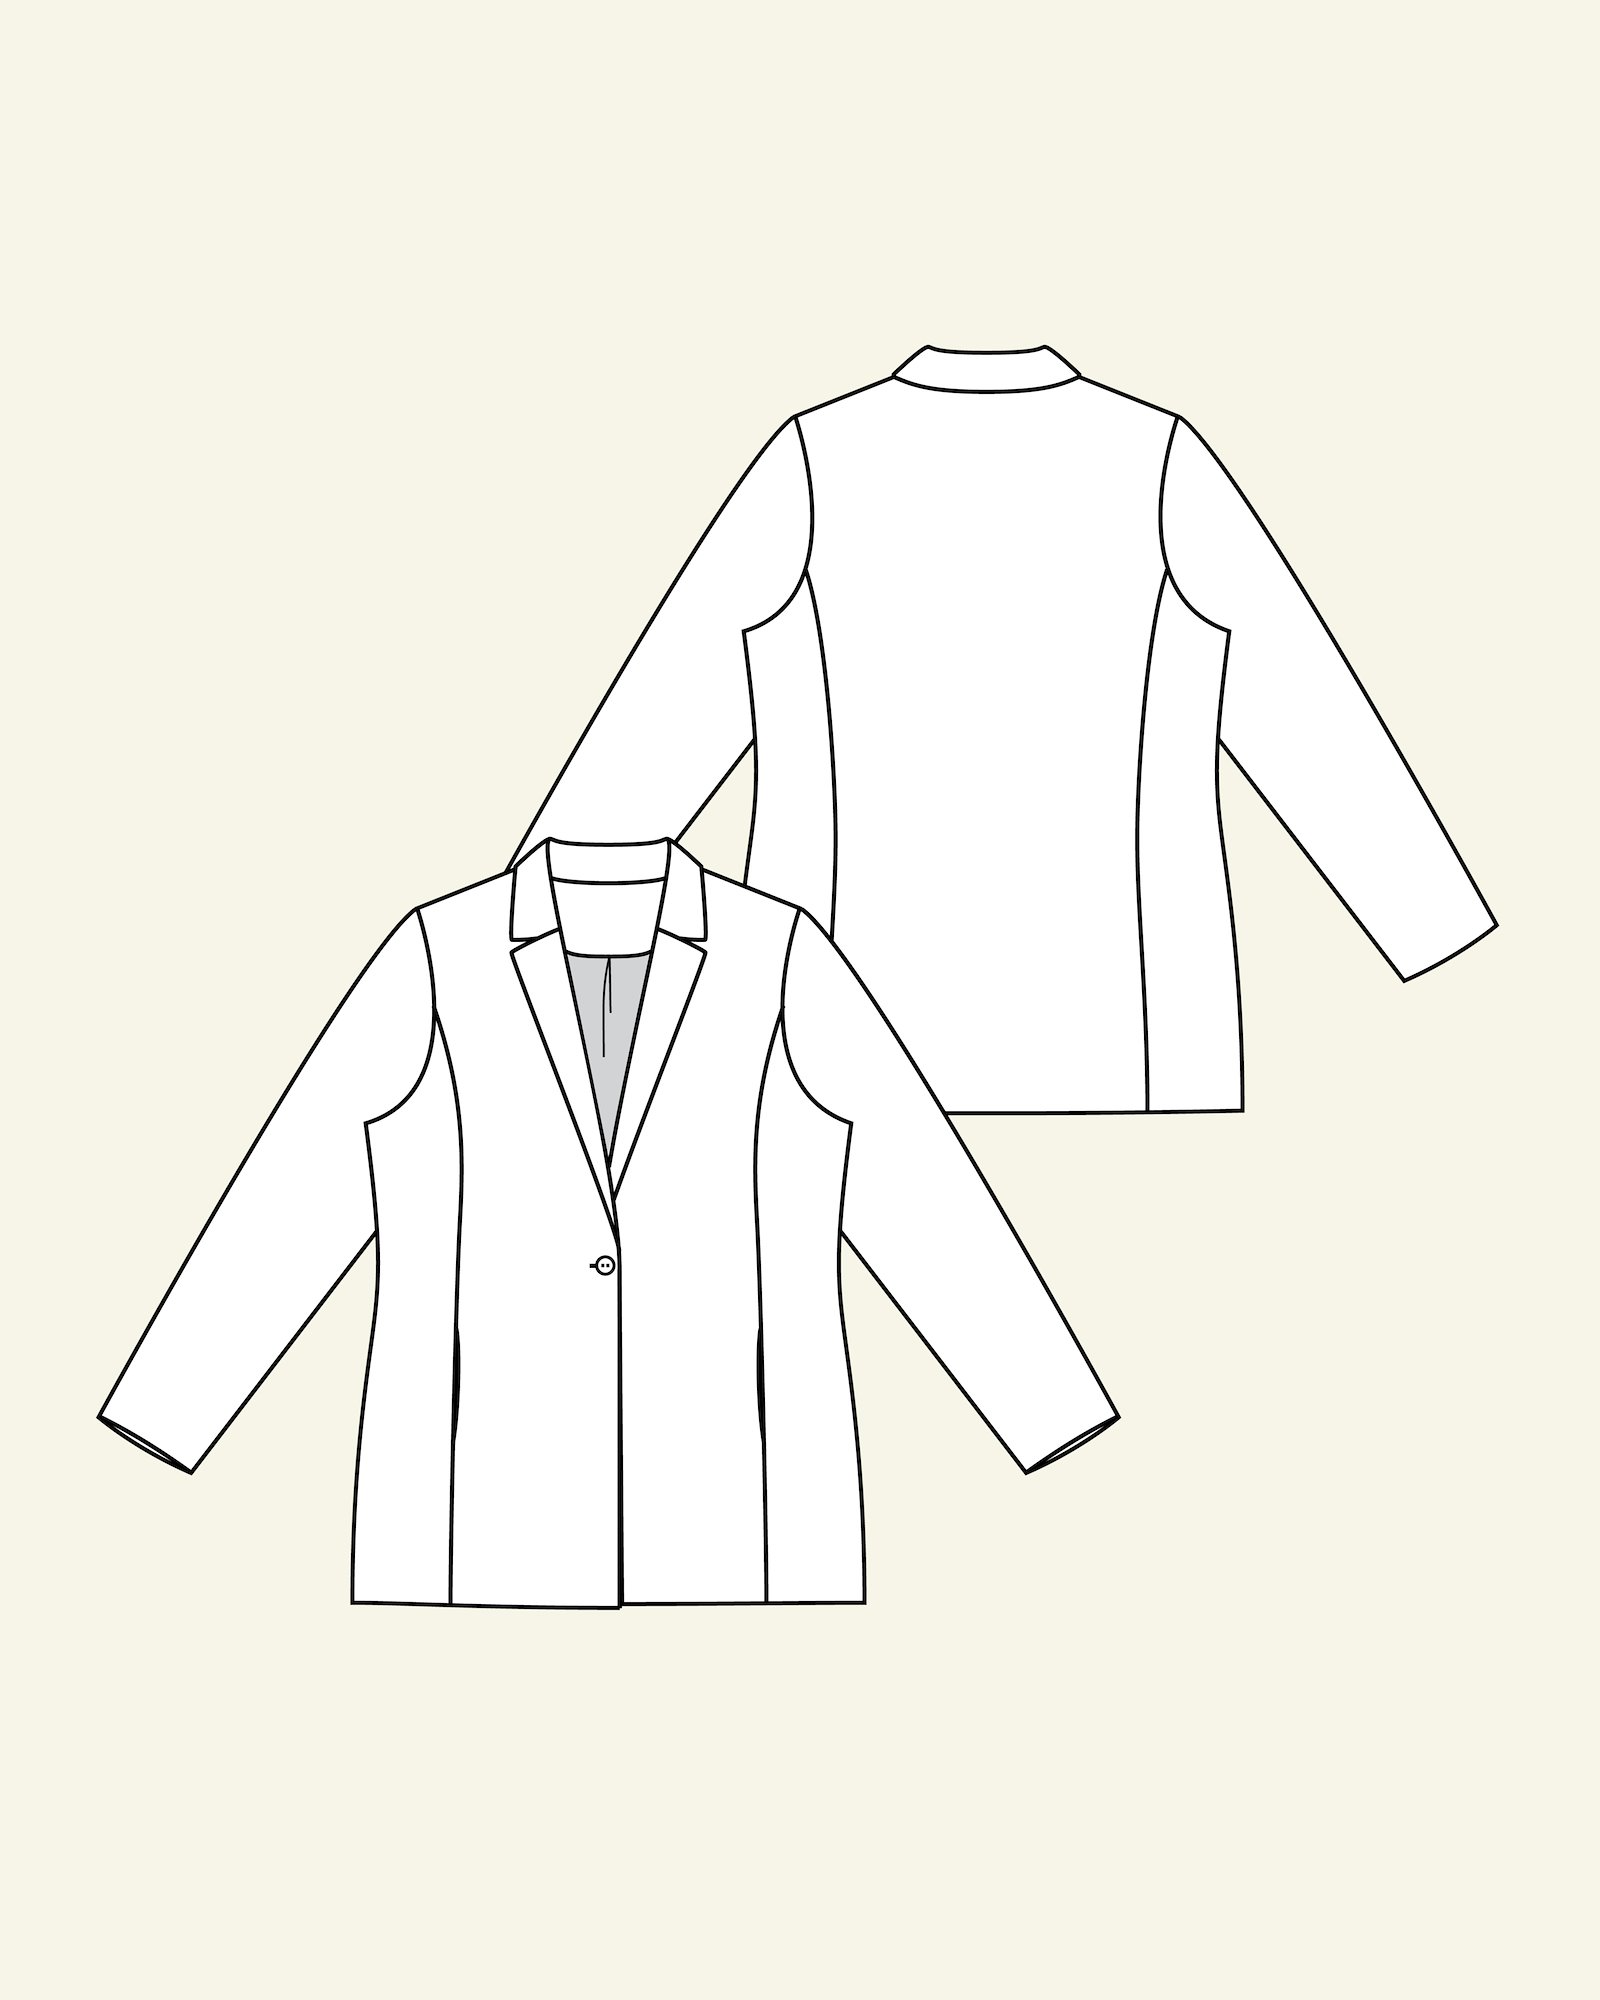 Suit jacket with lining, 38/10 p24048_pack